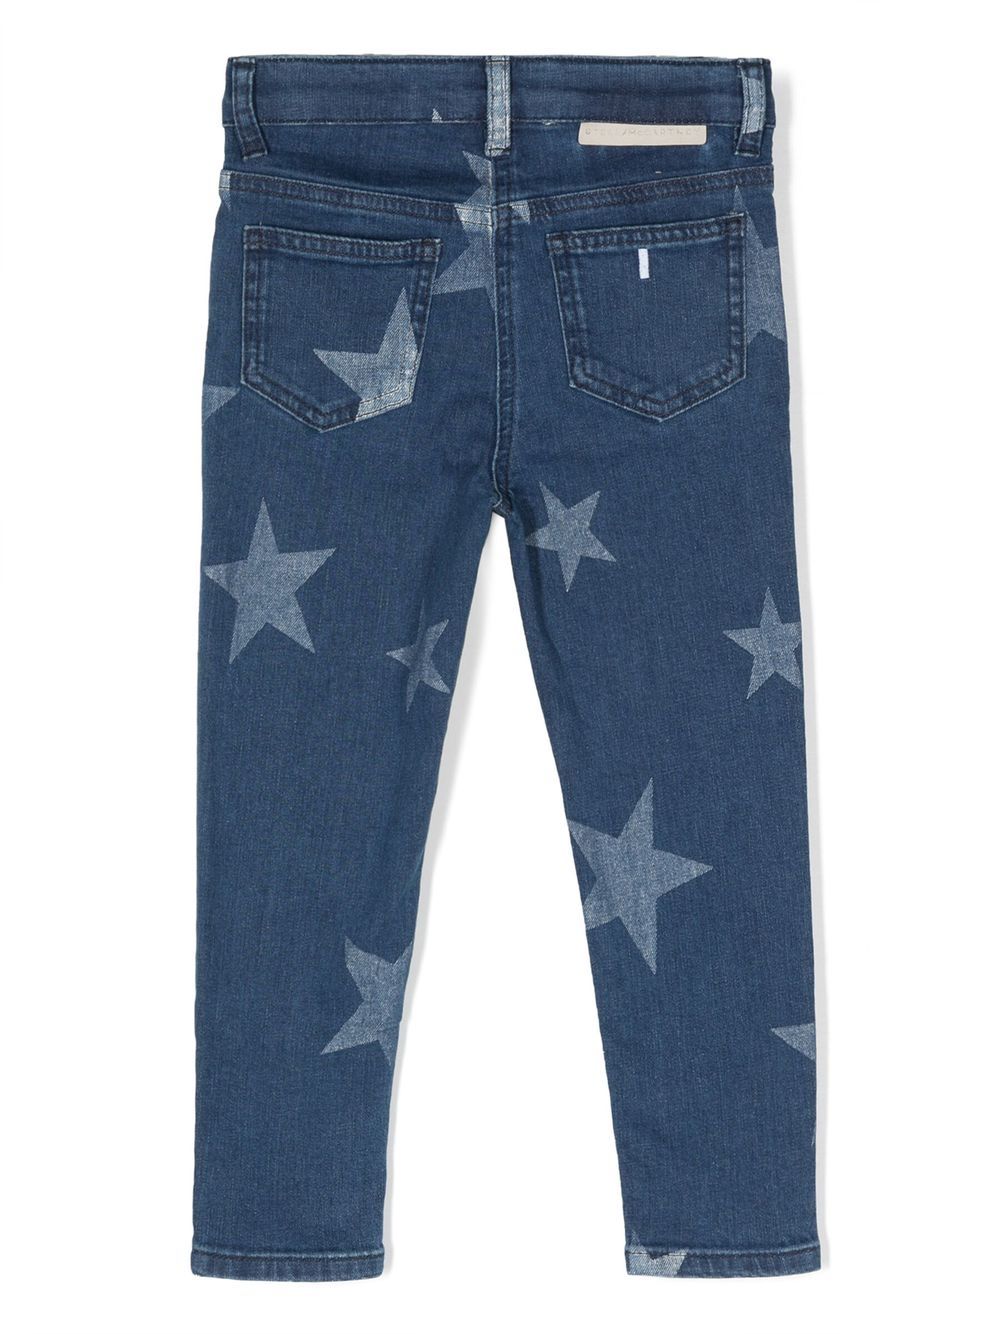 Jeans slim fit con stampa stelle